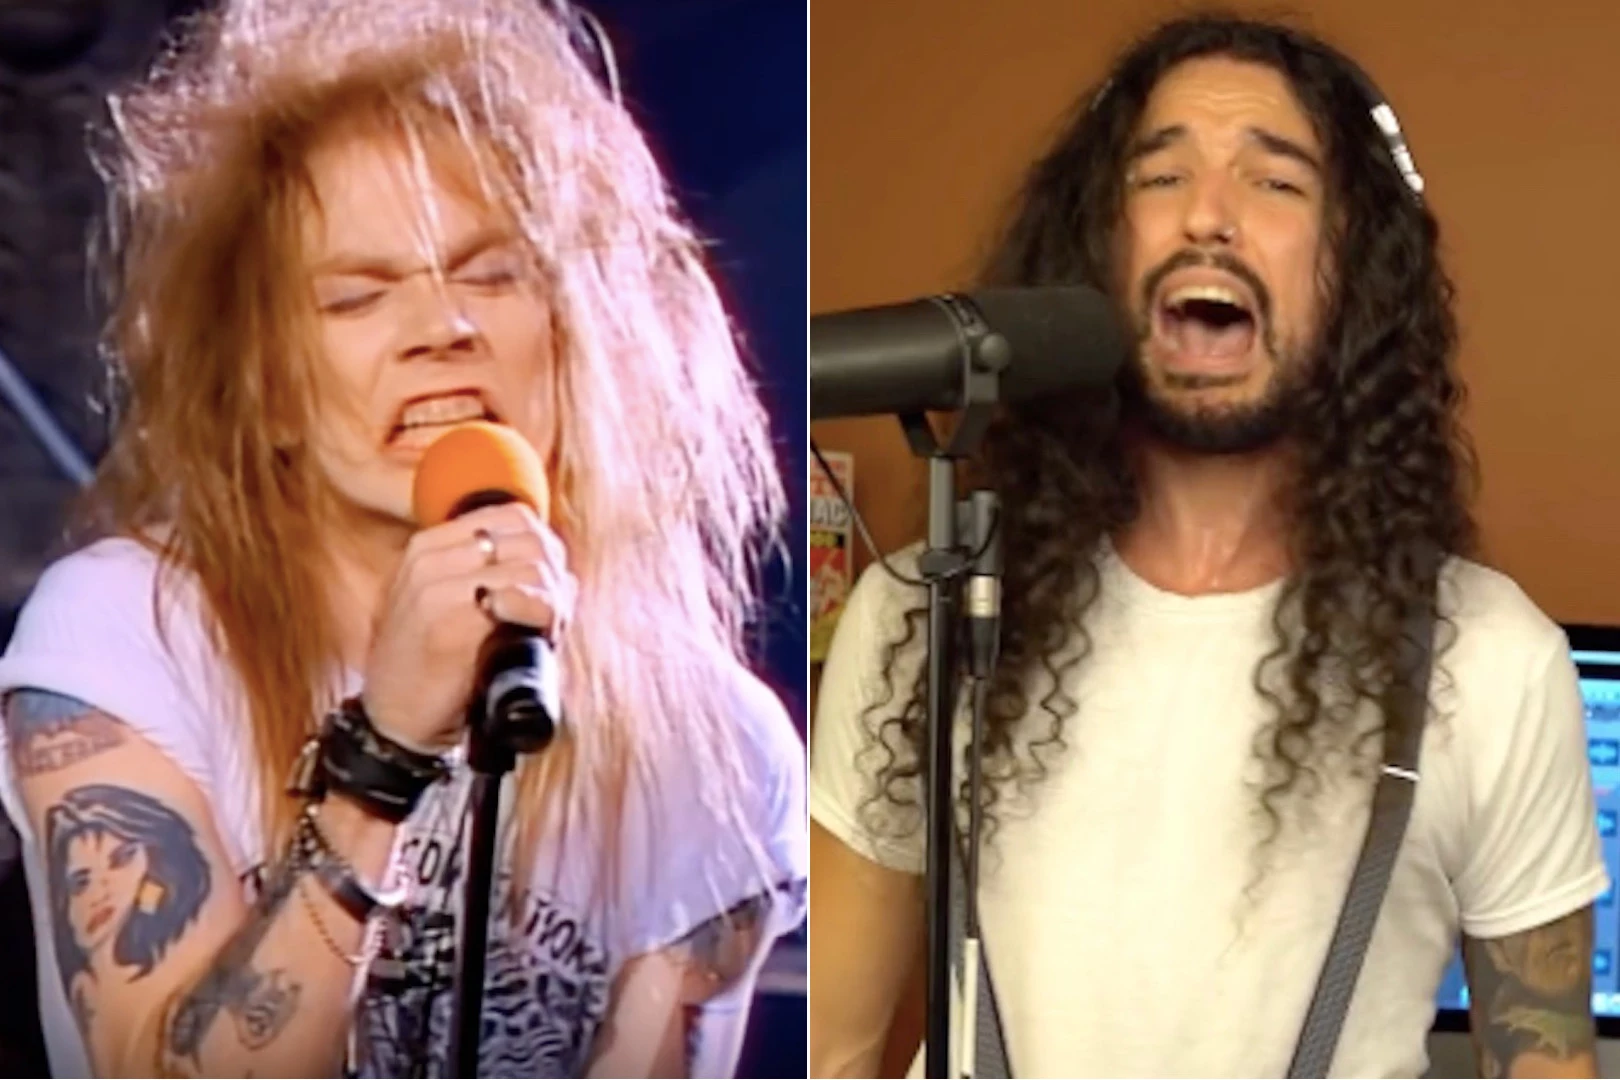 Watch Guns N' Roses' 'Welcome to the Jungle' in 20 Styles